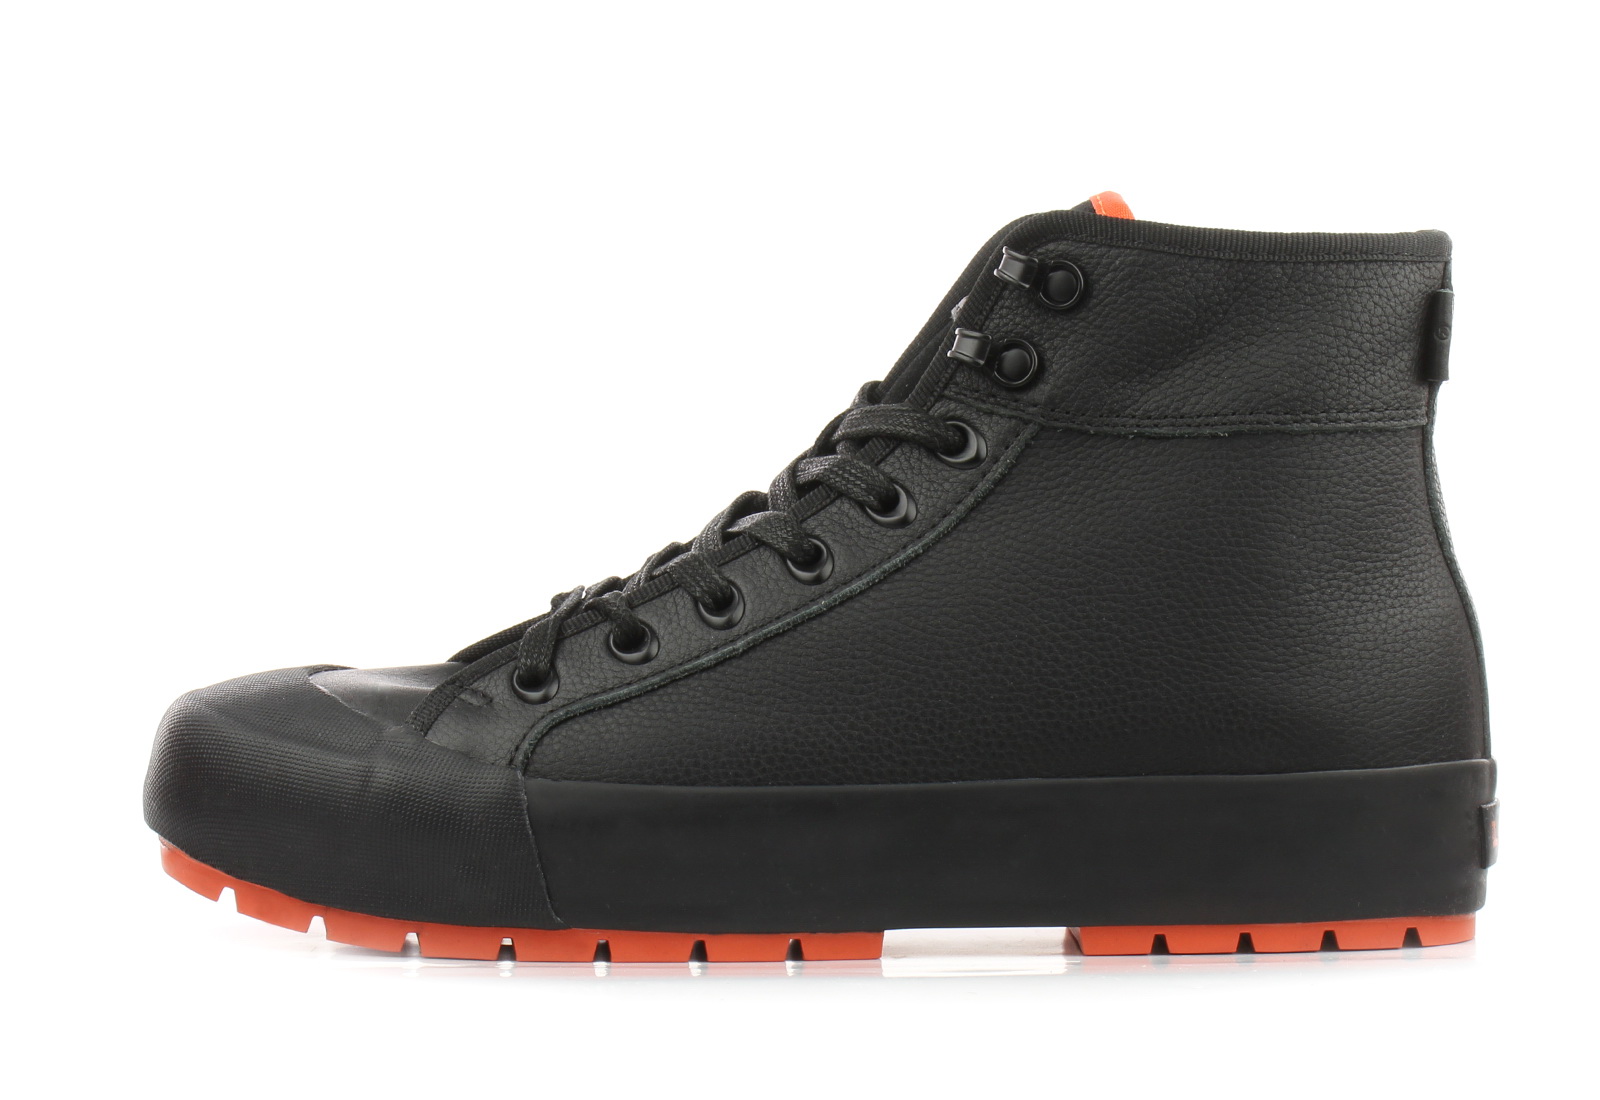 Levis High trainers - La Paz Hi - 233633-936-59 - Online shop for sneakers,  shoes and boots